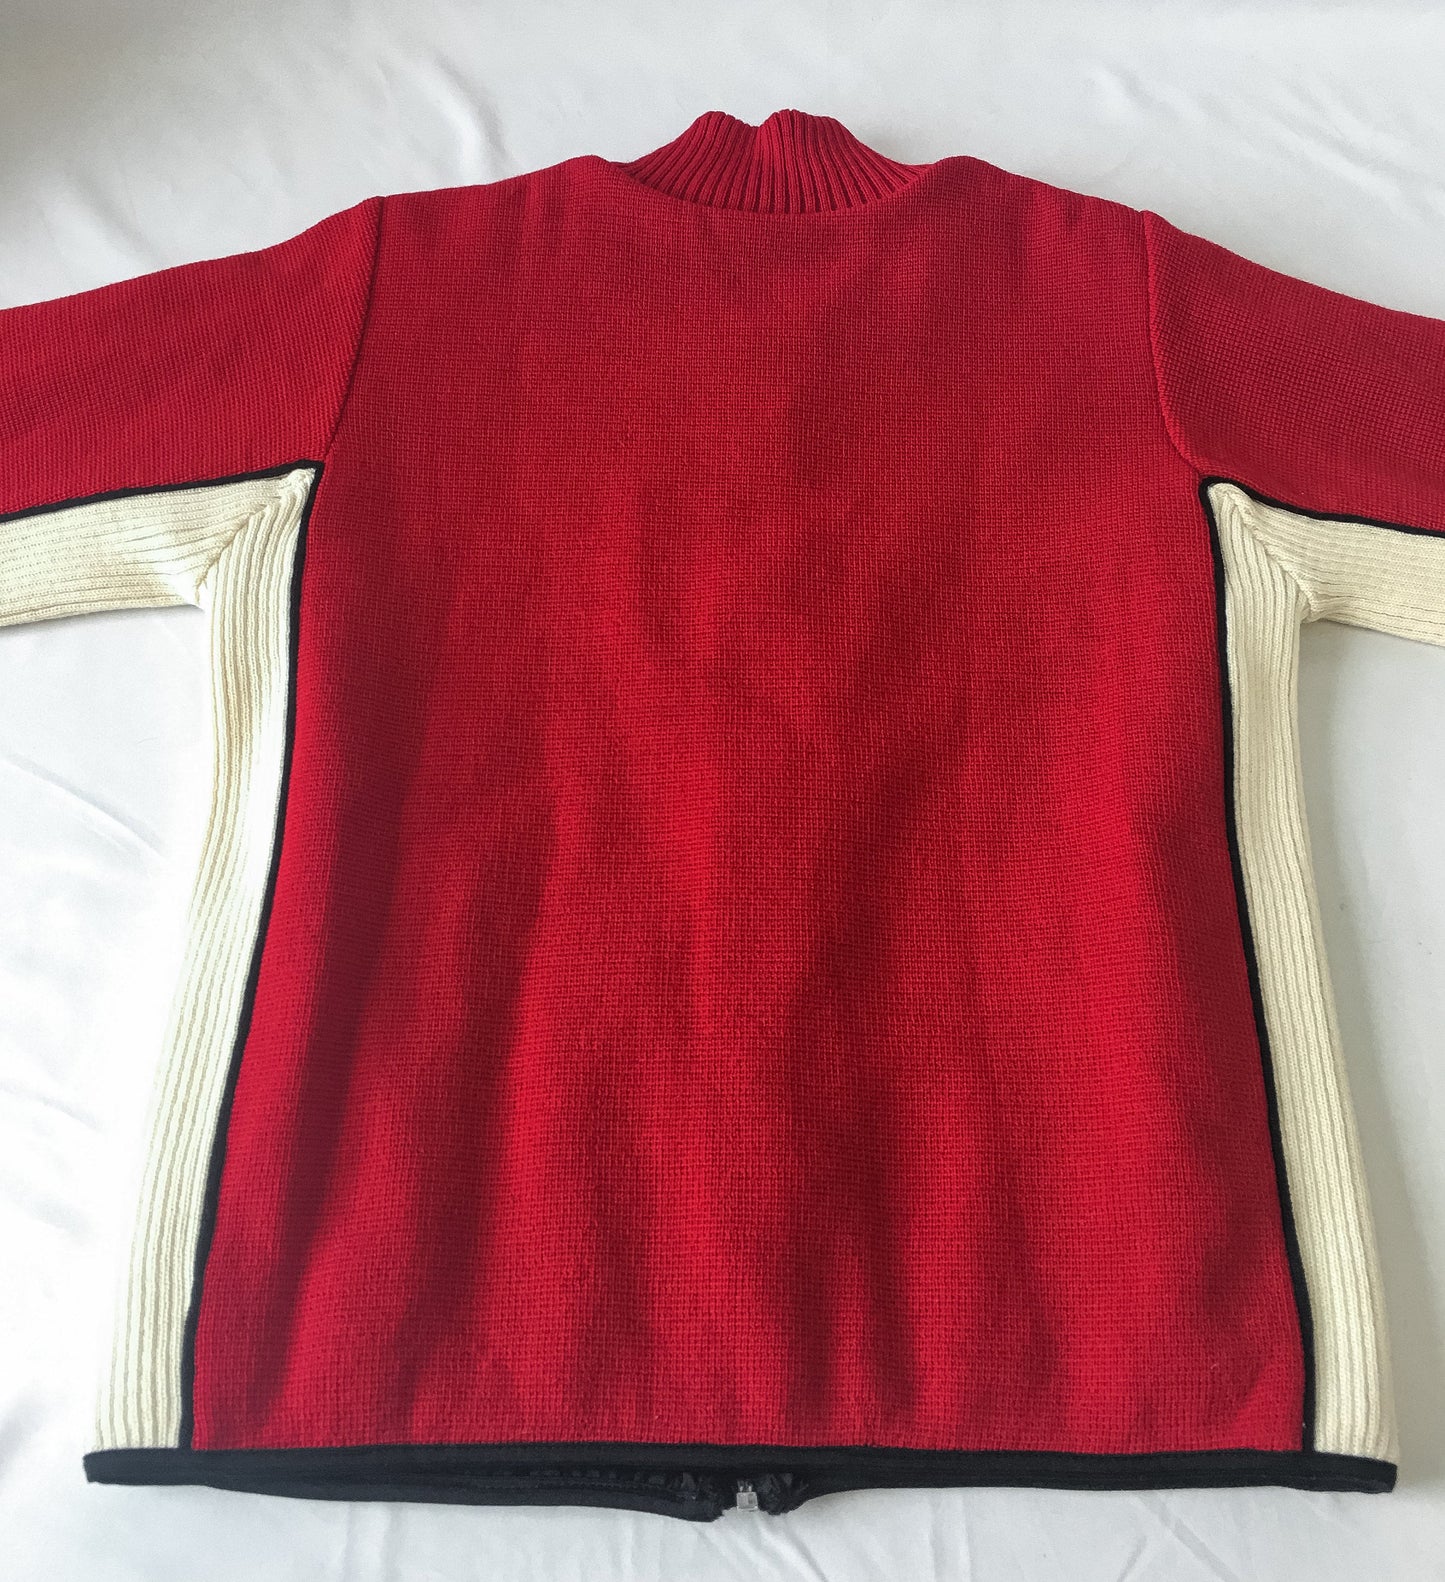 Vintage Norskwear Red & Cream/Off-White 100% Wool Zip-Up Sweater, Sz. S, Made in Norway